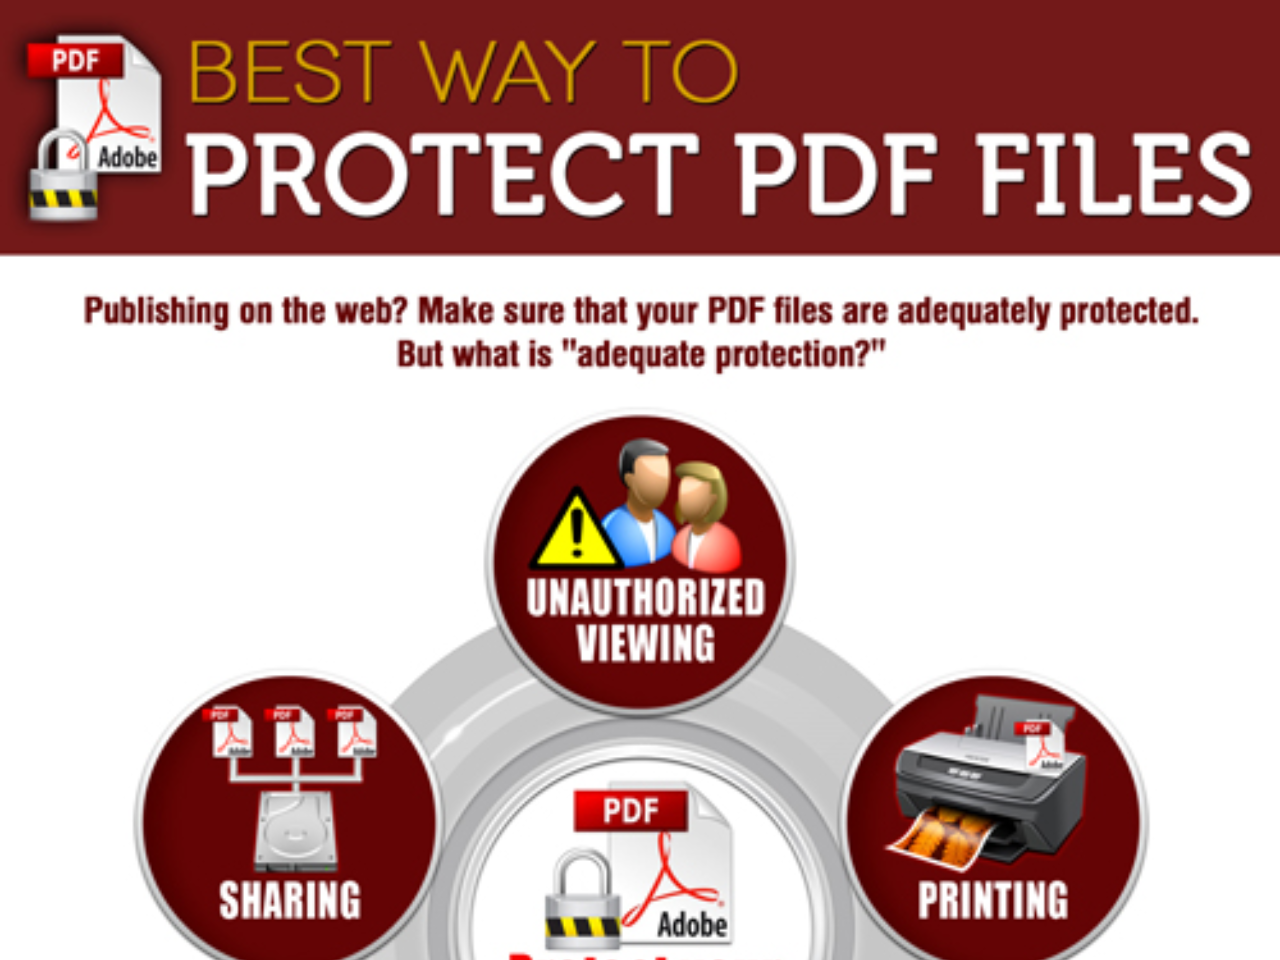 Best Way To Protect PDF Files